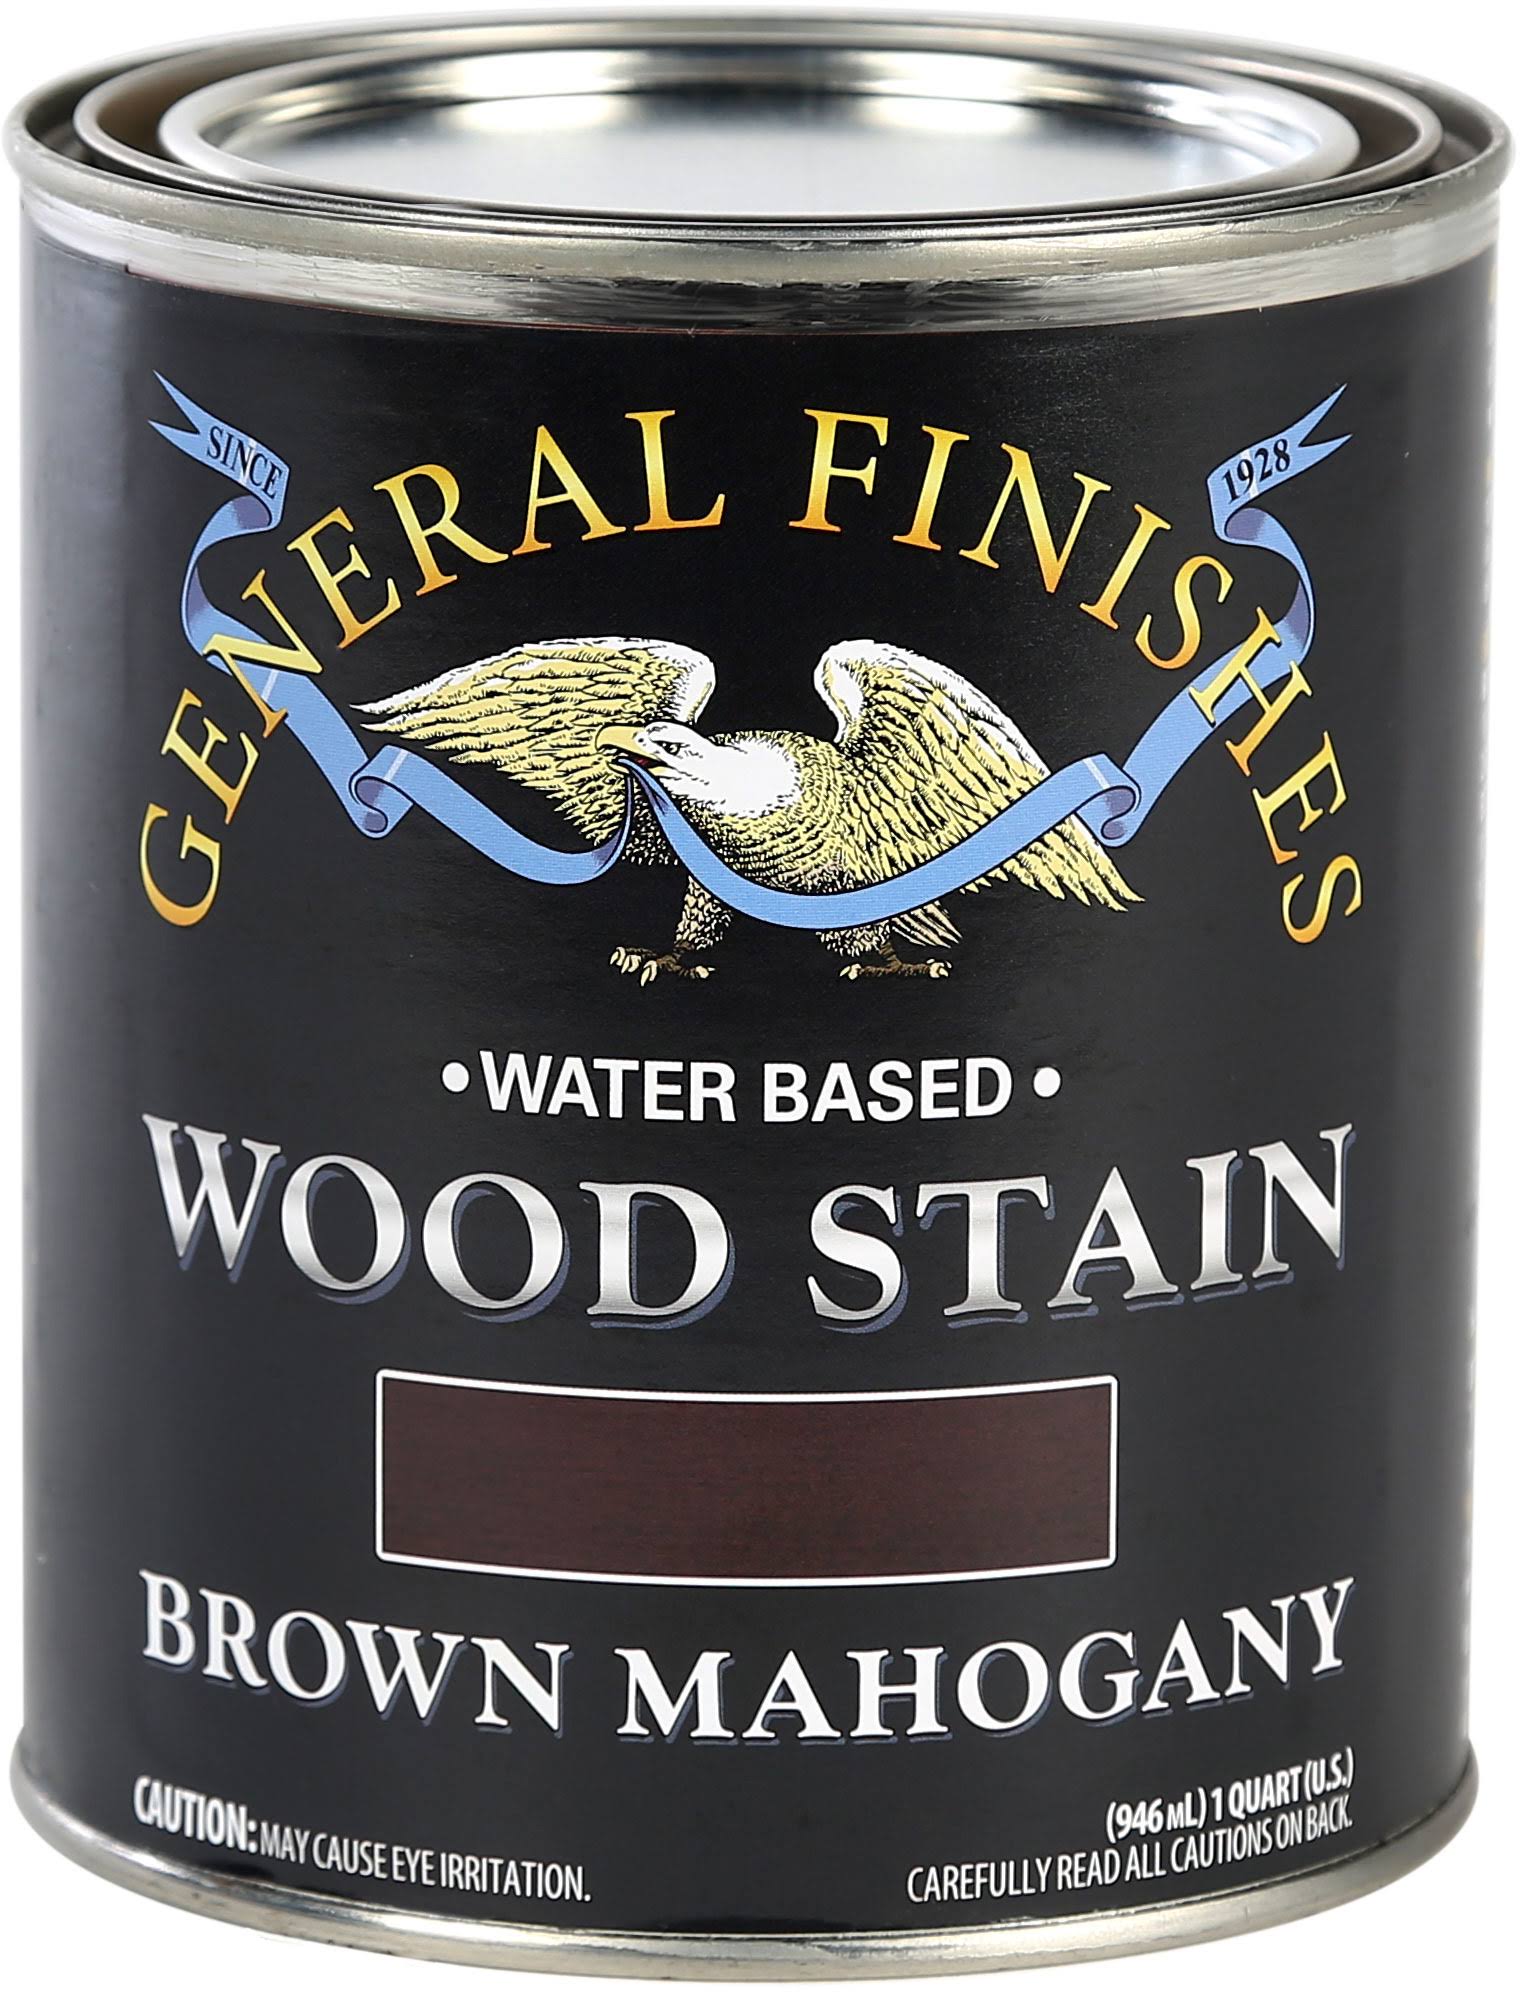 General Finishes Water Based Wood Stain - 1qt, Brown Mahogany